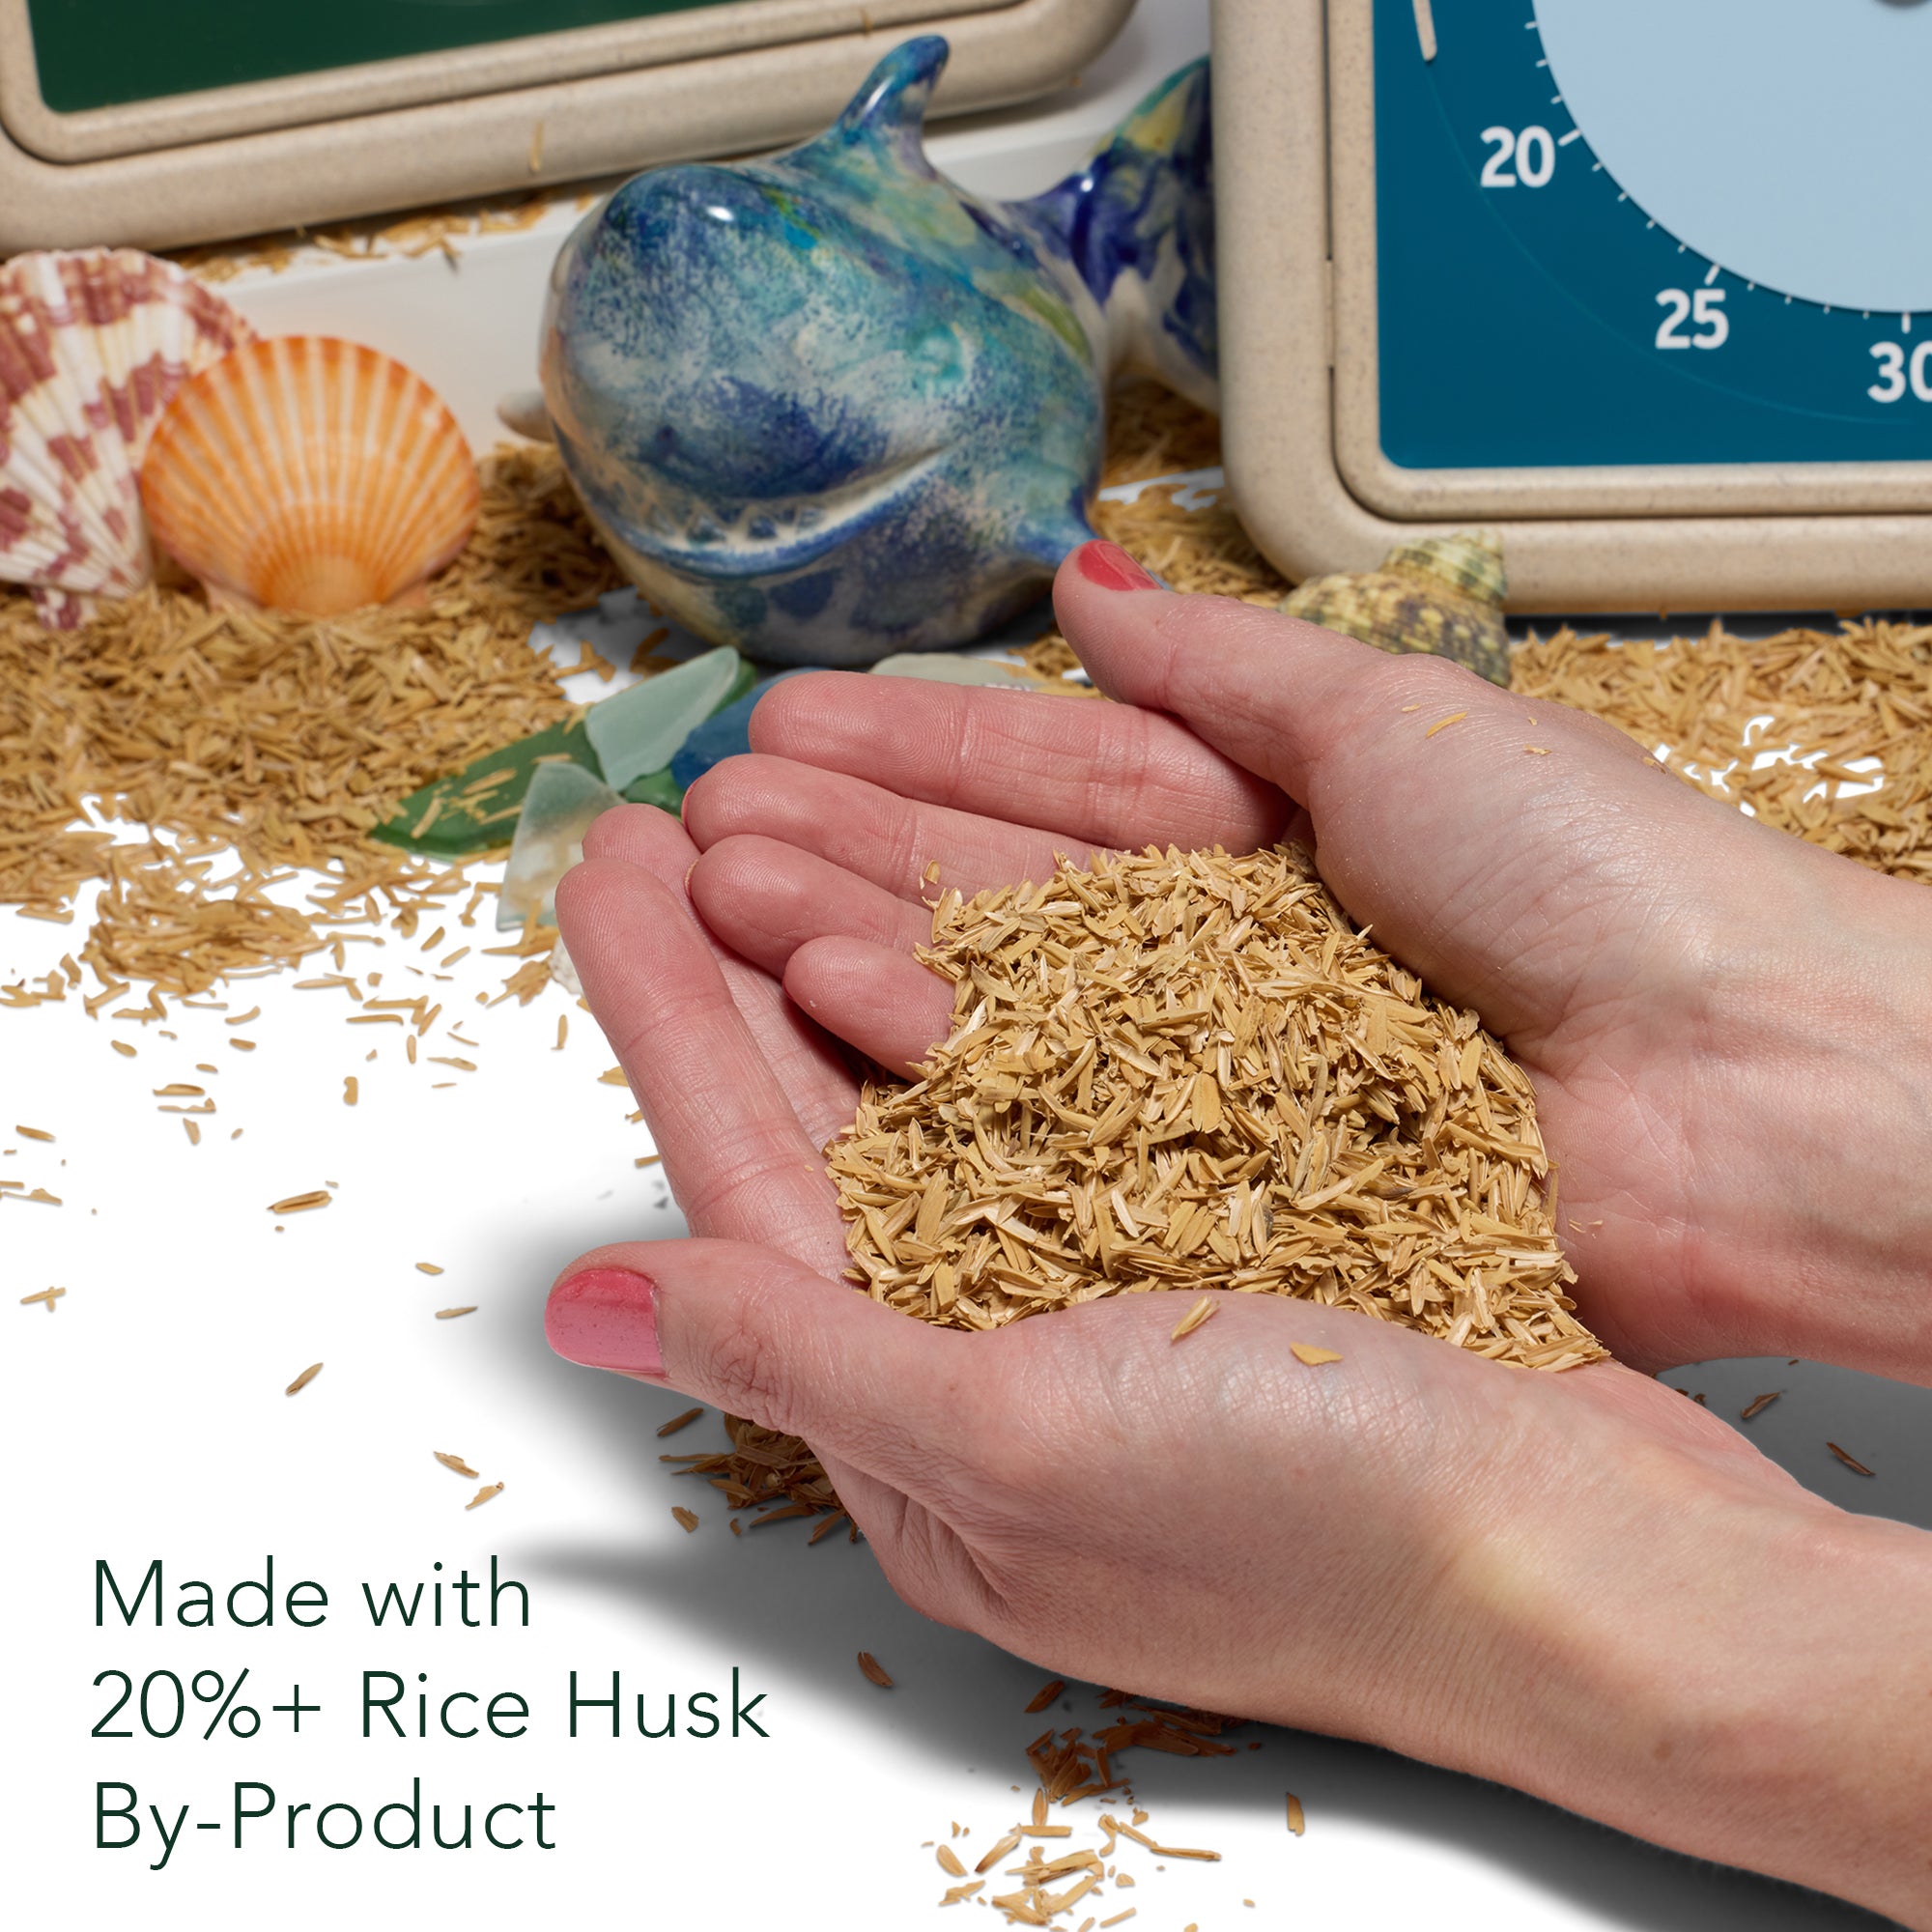 Hands are shown holding a pile of rice husks. A message is included in the photo reading "Made with 20% + Rice Husk By-Product" to indicate that the plastic used in this device is combined with rice husk material. 